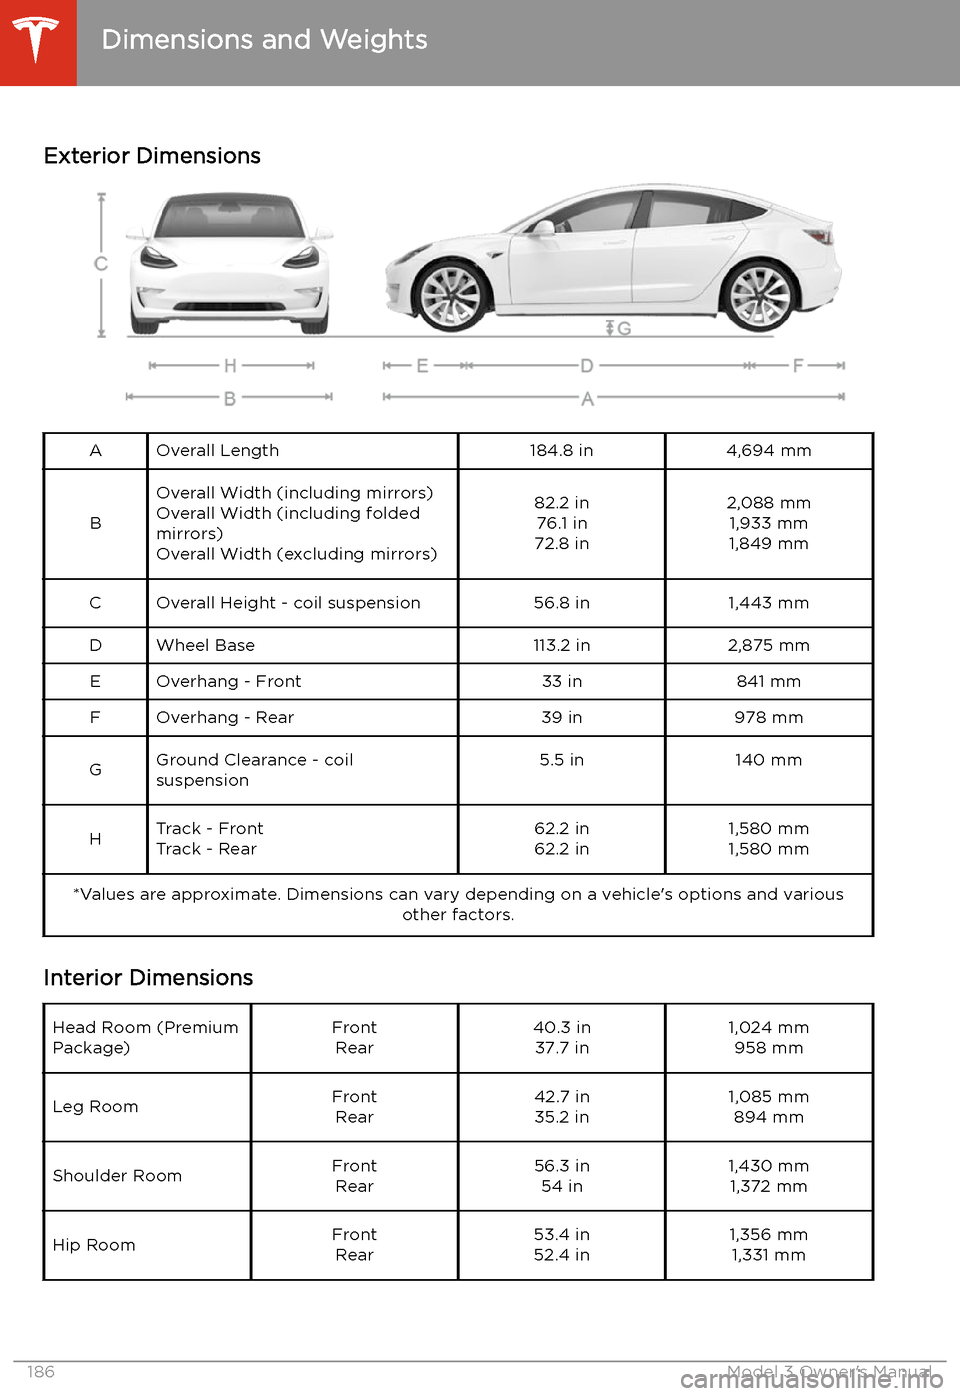 TESLA MODEL 3 2020  Owners Manuals Dimensions and Weights
Exterior Dimensions
AOverall Length184.8 in4,694 mm
B
Overall Width (including mirrors) Overall Width (including folded
mirrors)
Overall Width (excluding mirrors)82.2 in 76.1 in